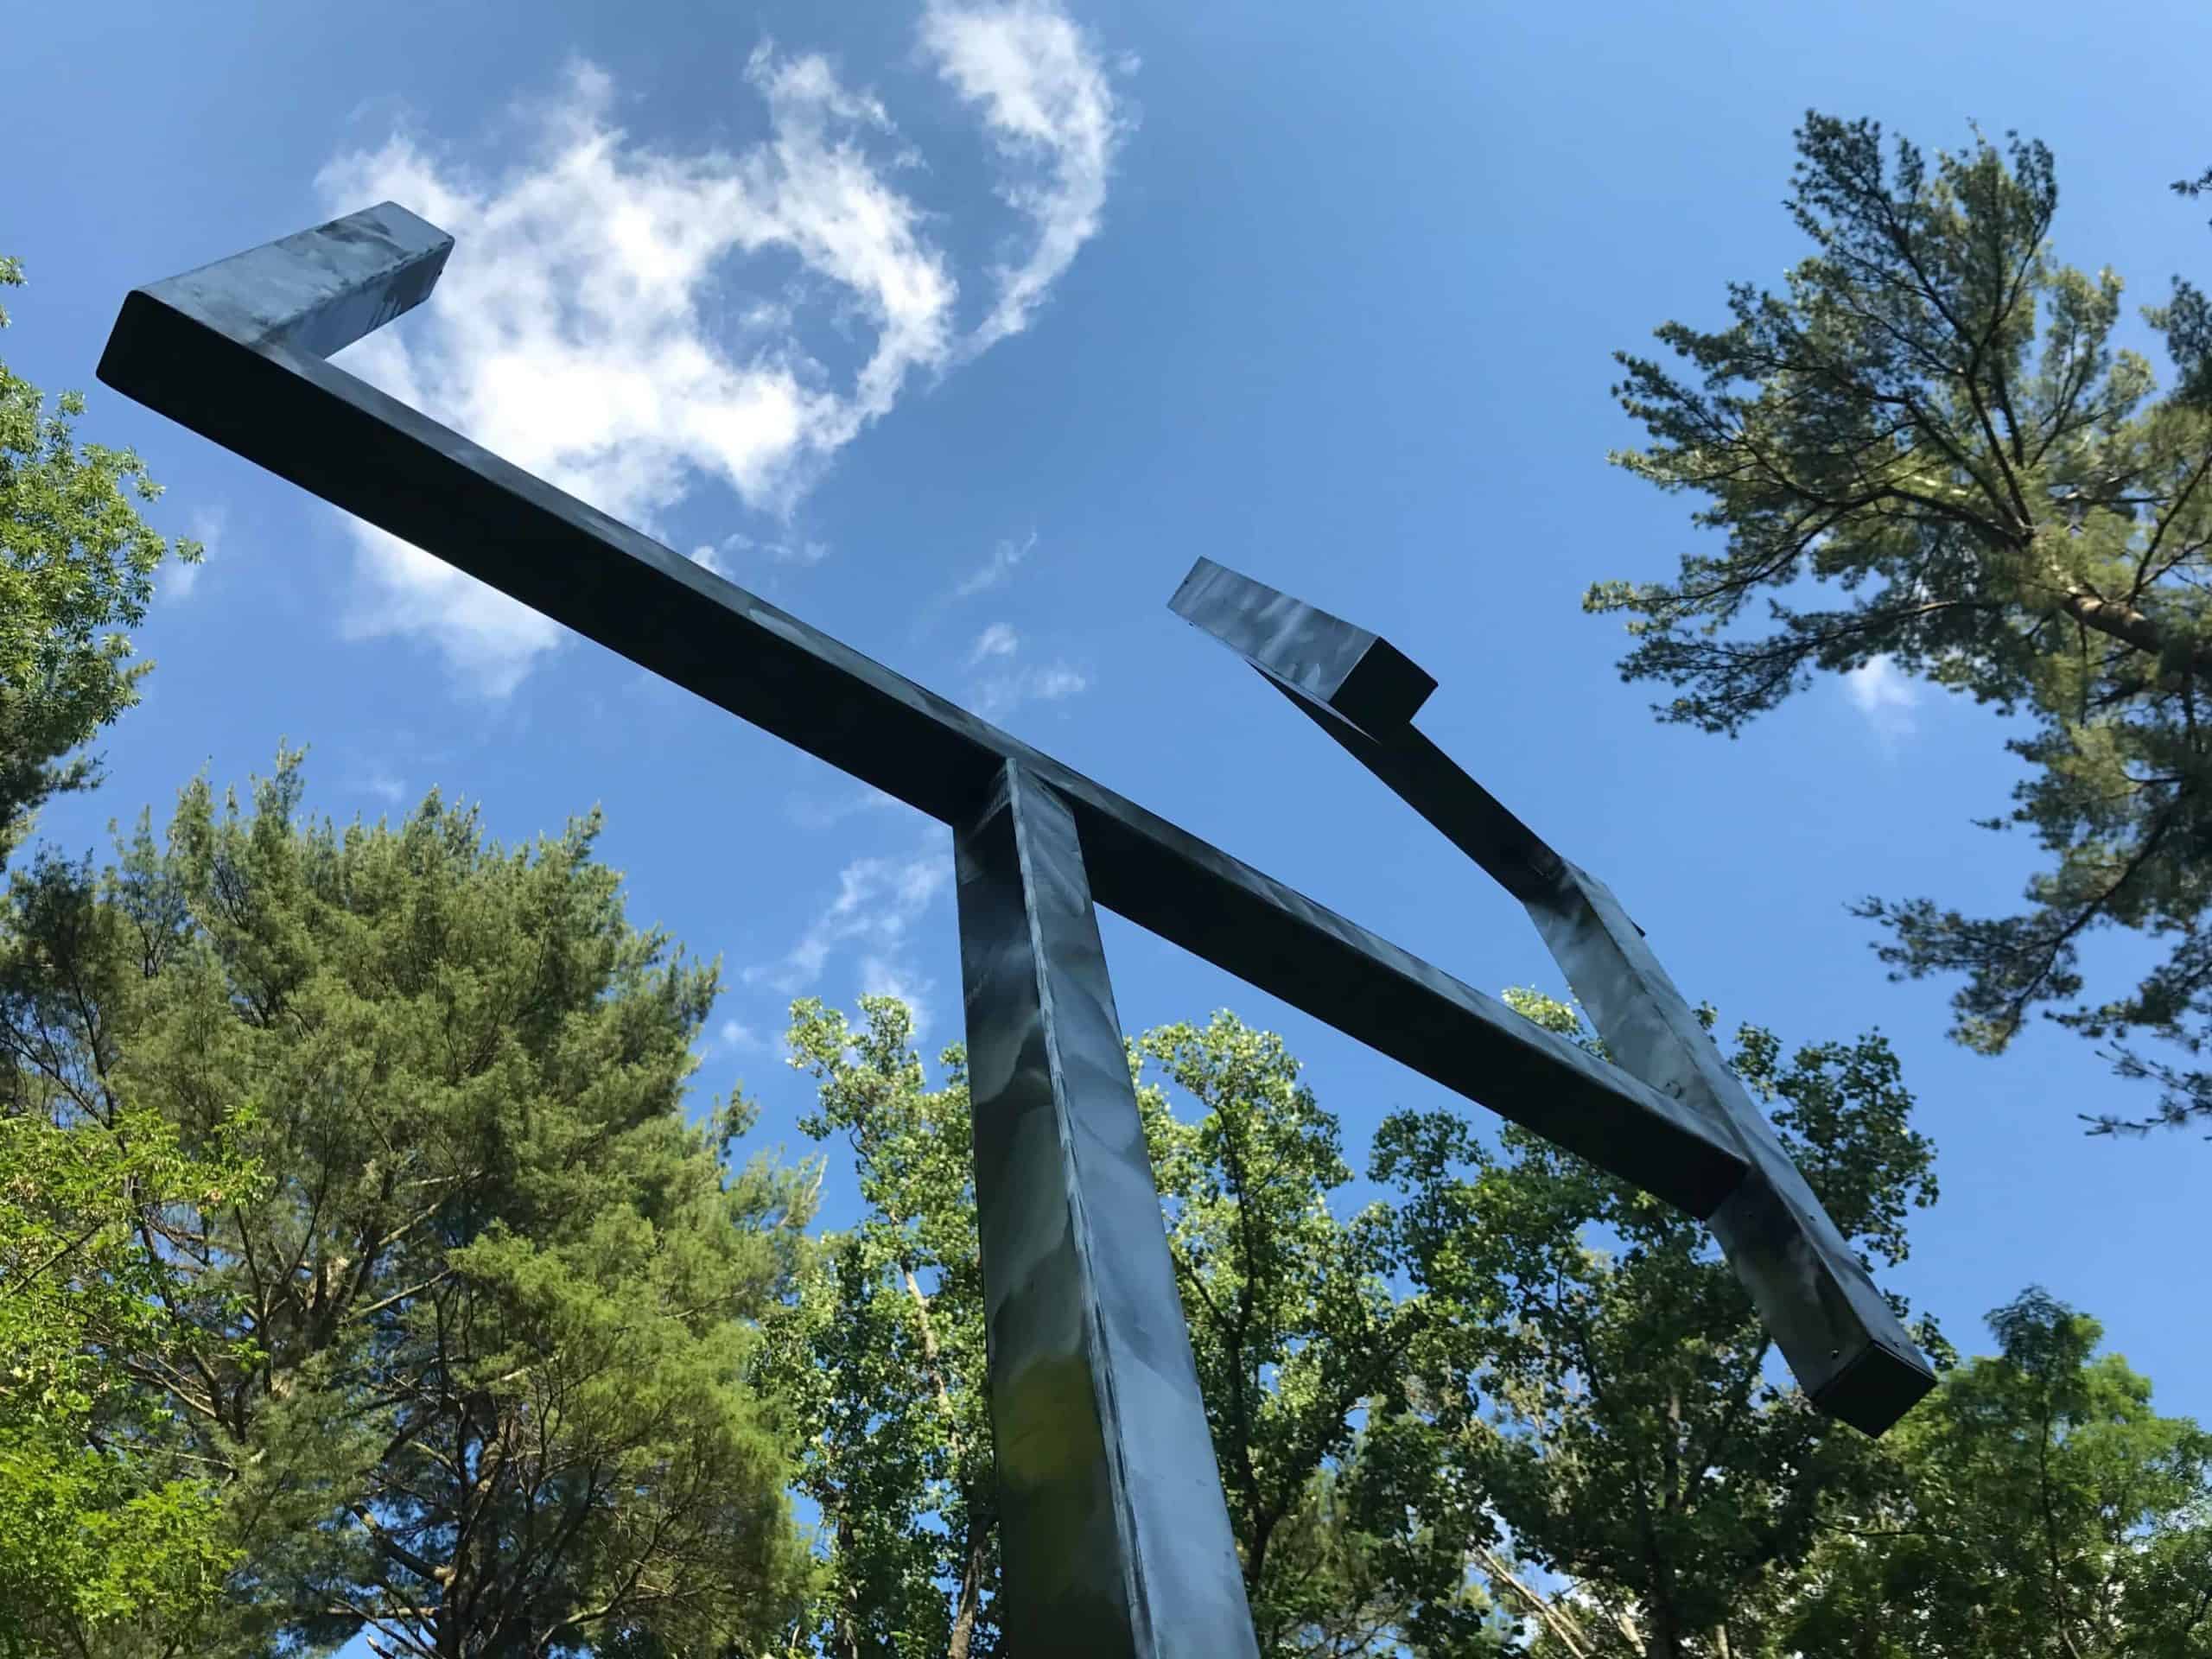 A George Rickey kinetic sculpture with goal-loke posts turns gentlyin the annual contemporary show at Chesterwood in Stockbridge, in summer 2018.